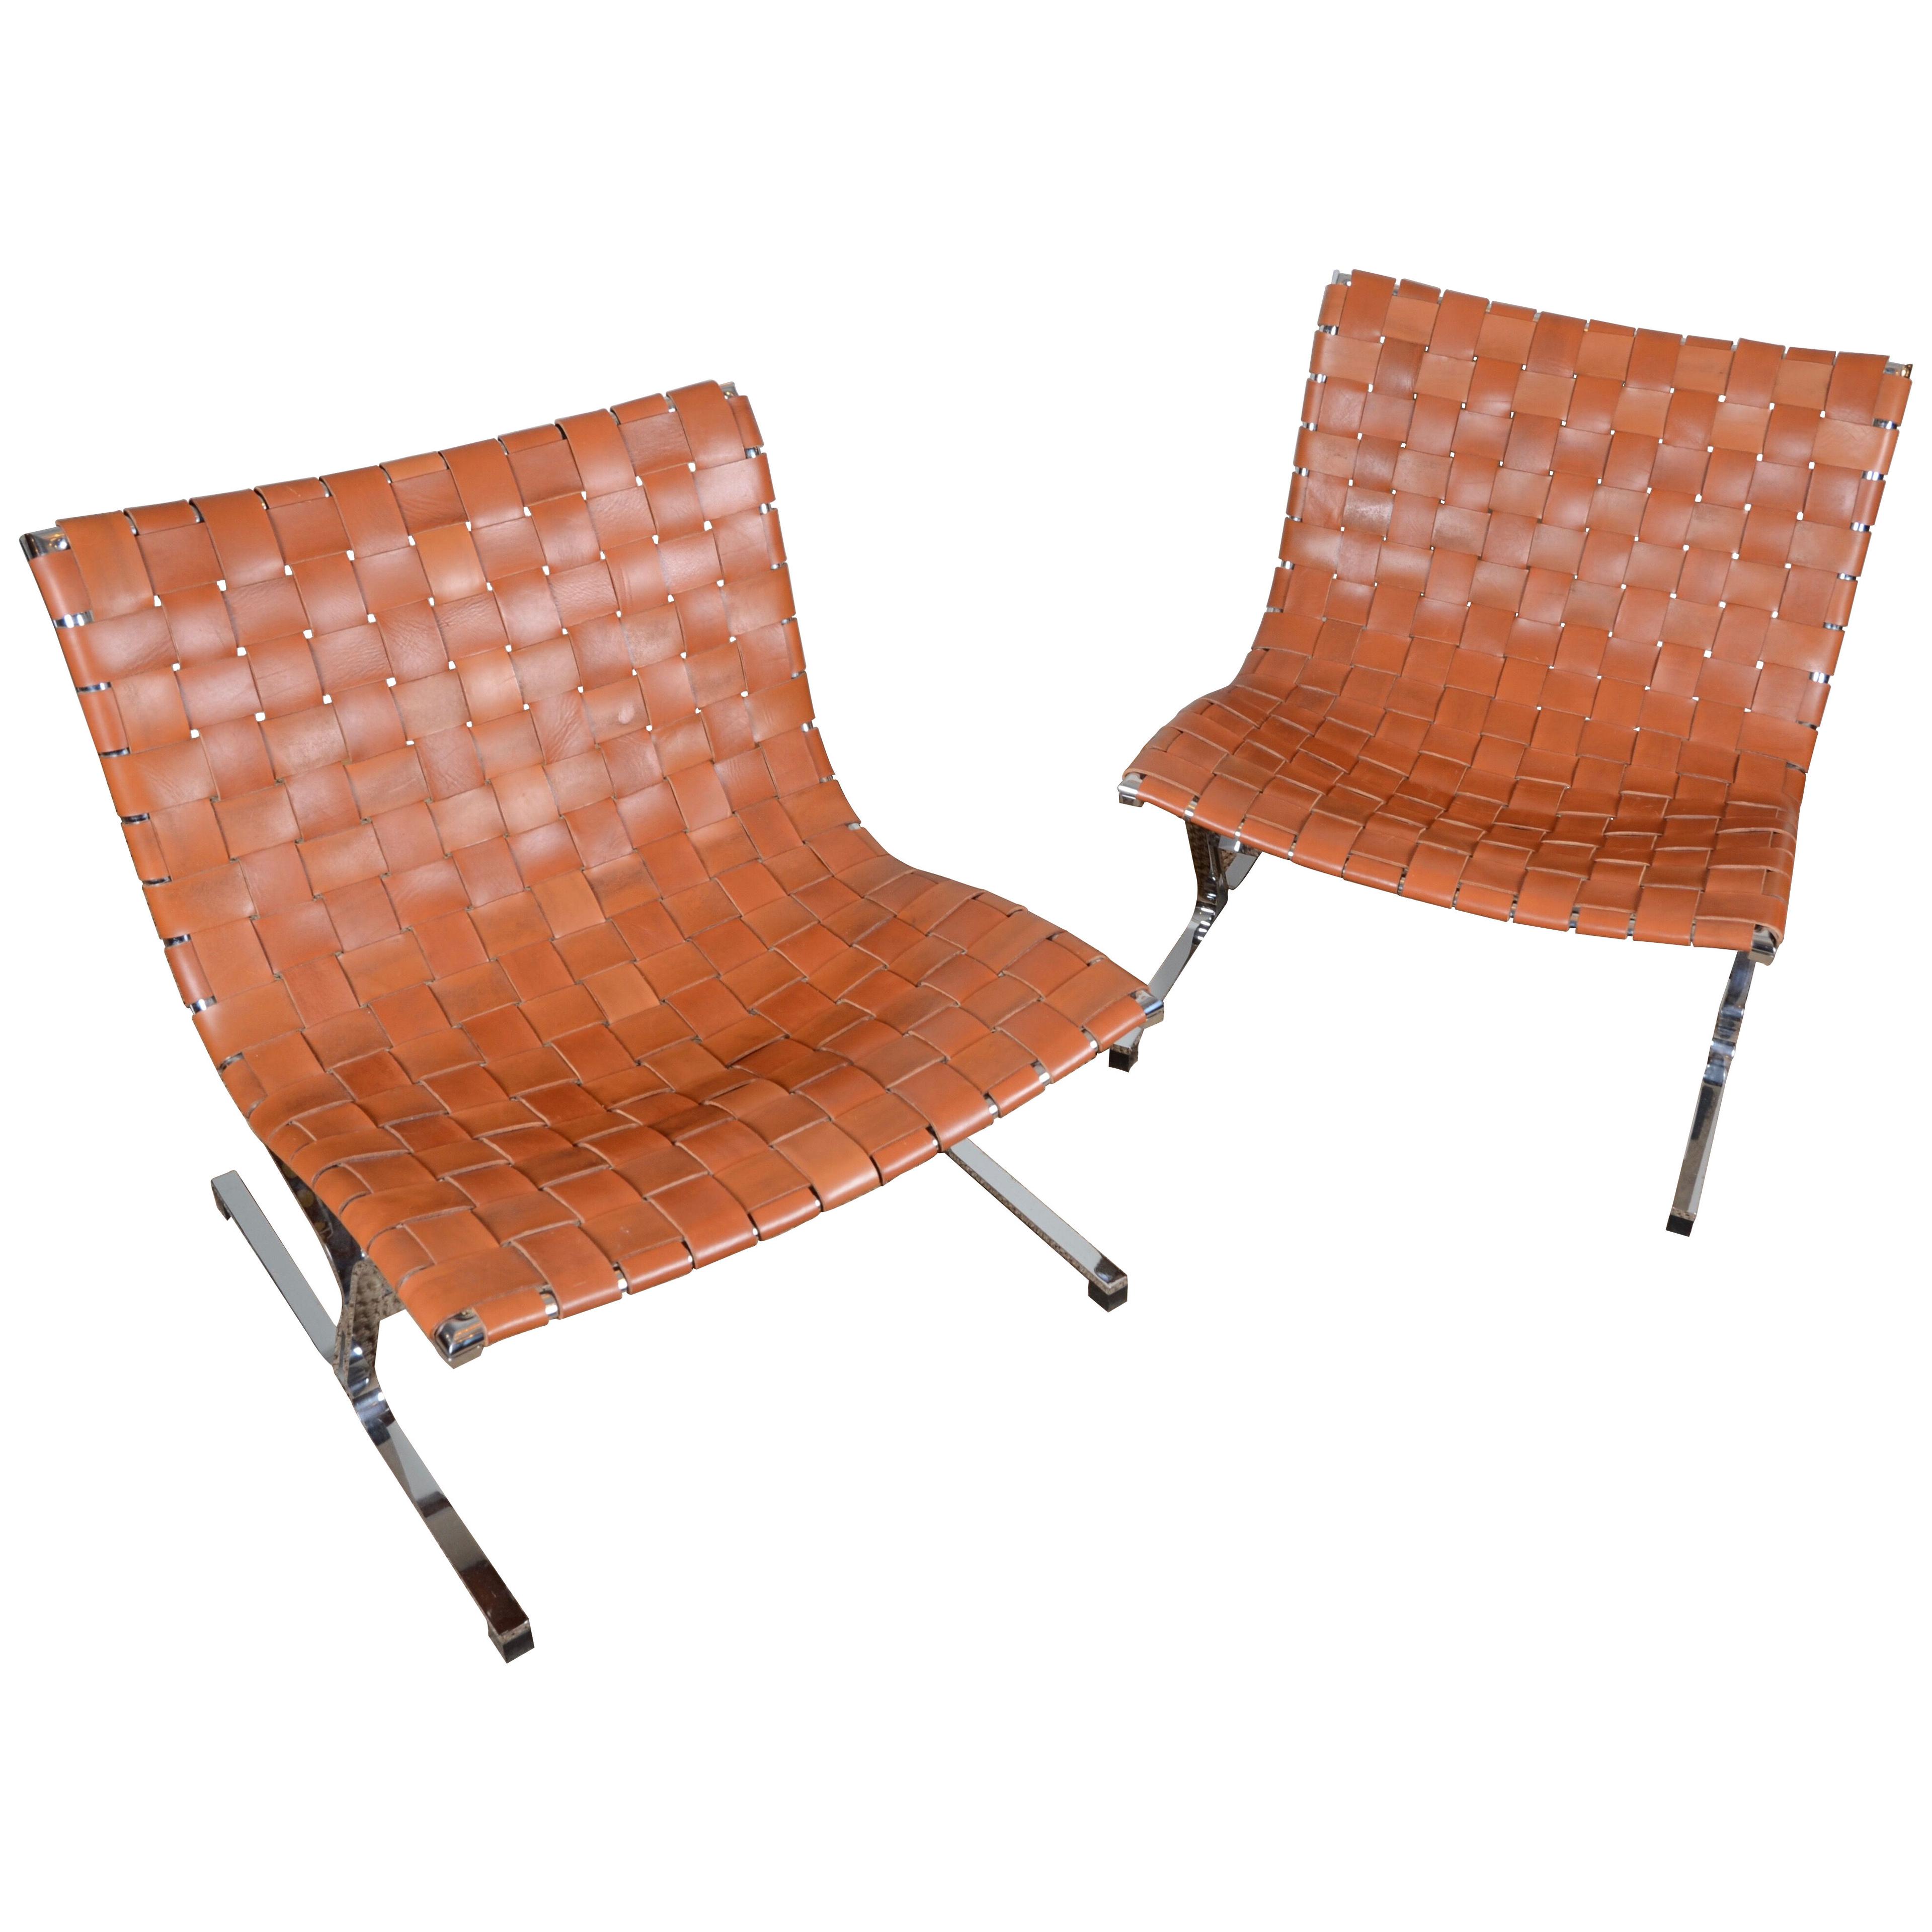 ROSS LITTELL, A PAIR OF PLR-1 CHAIRS, ICF ITALY 1960S